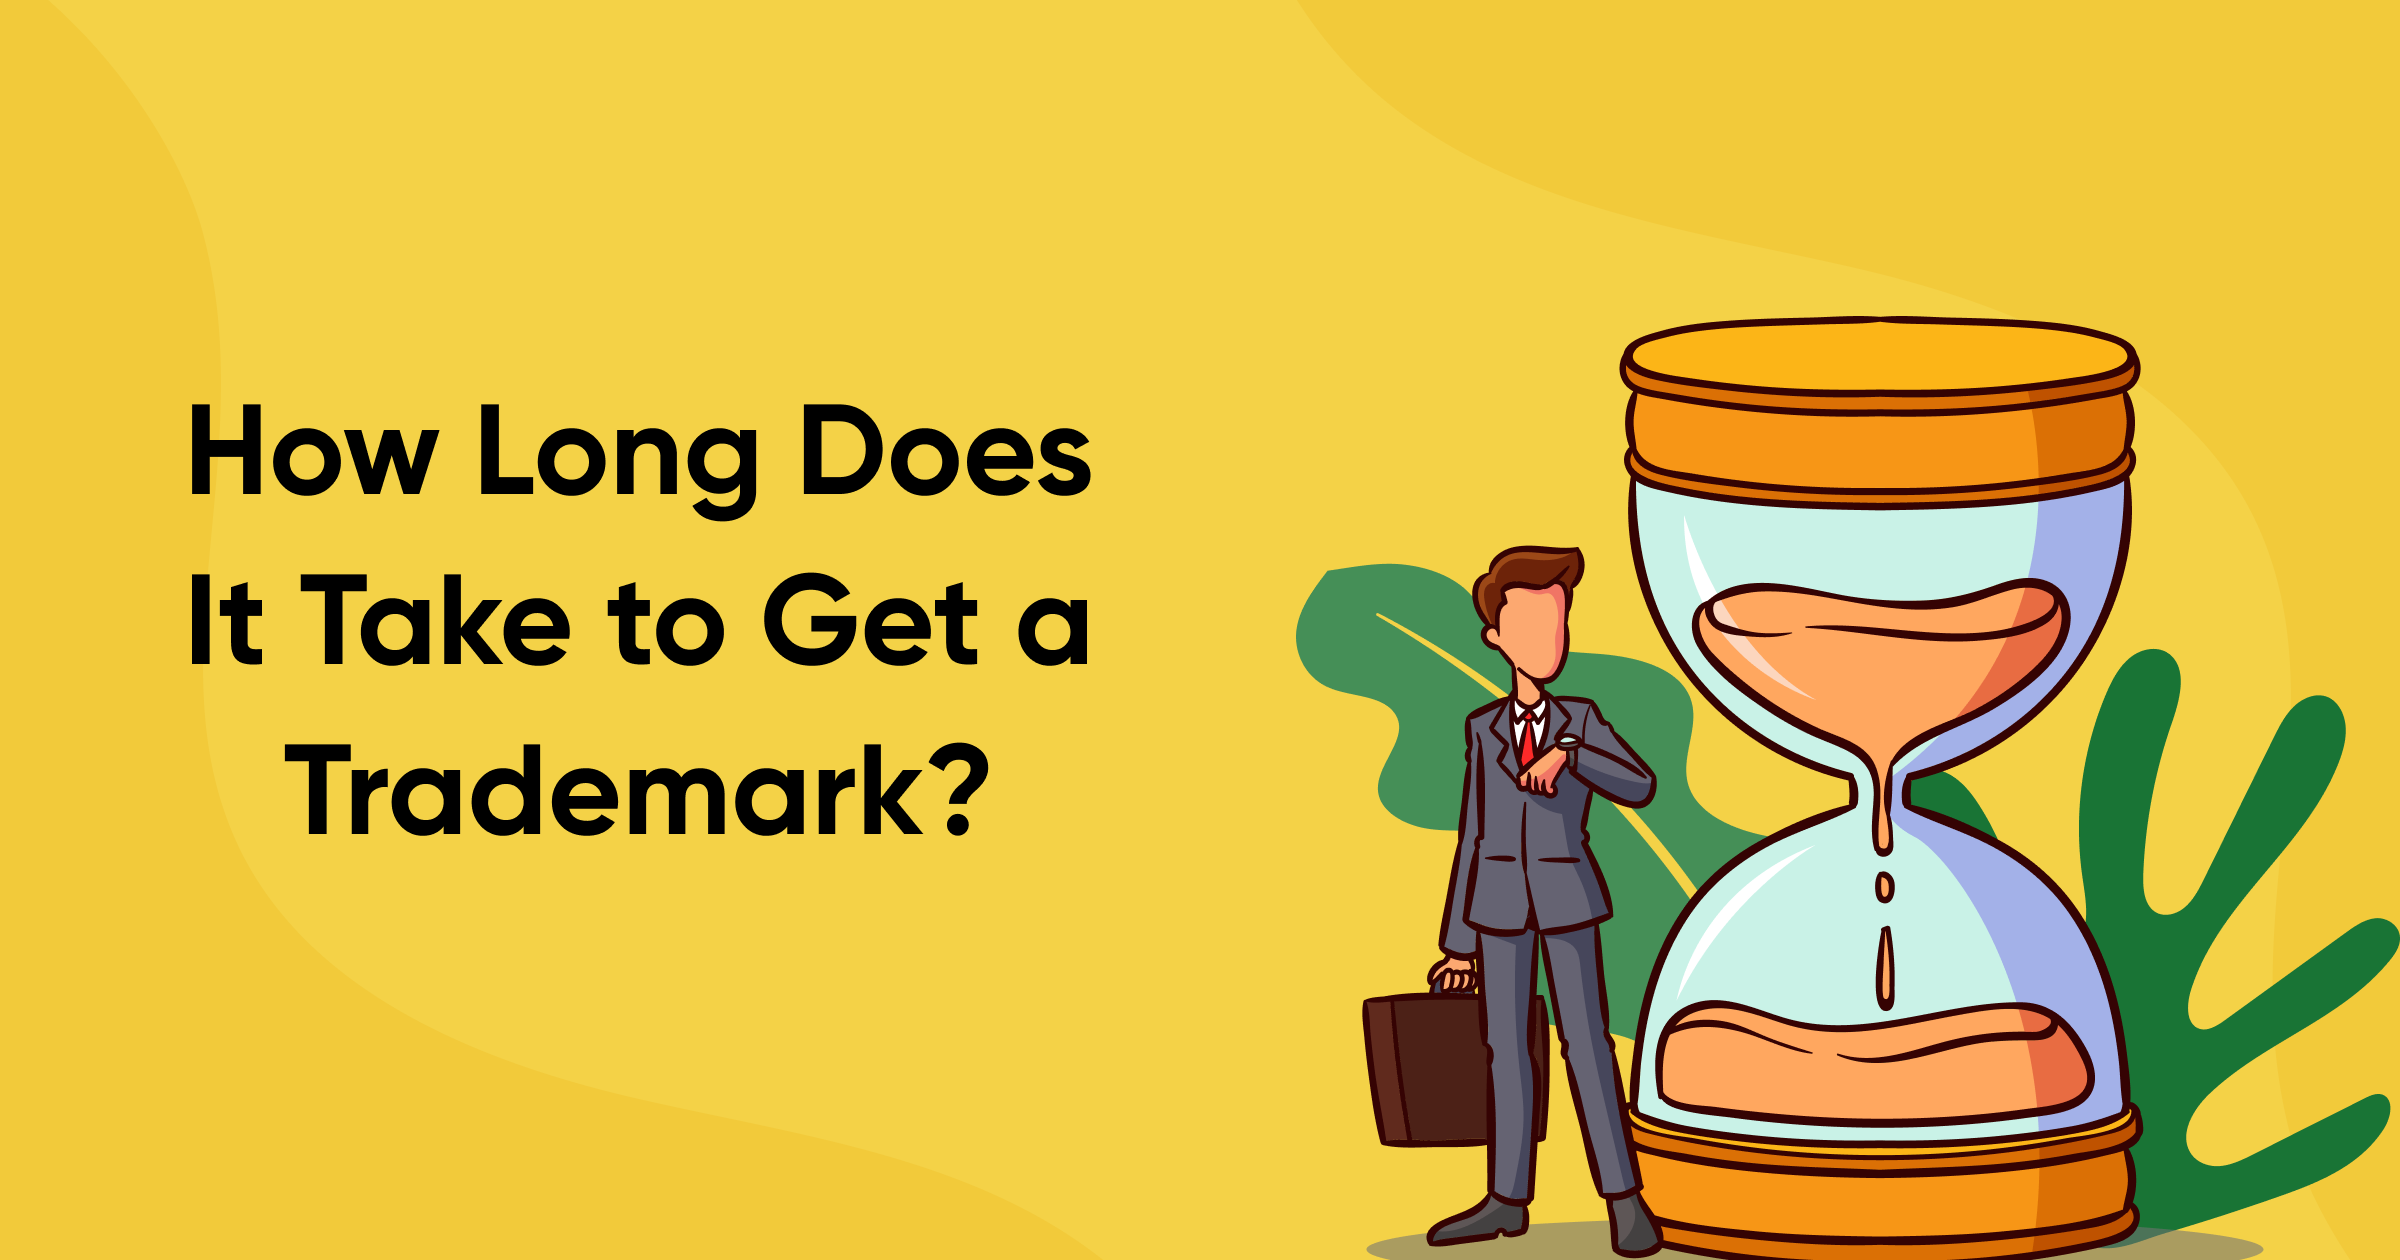 How Long Does It Take to Get a Trademark? (Let's Explore!)